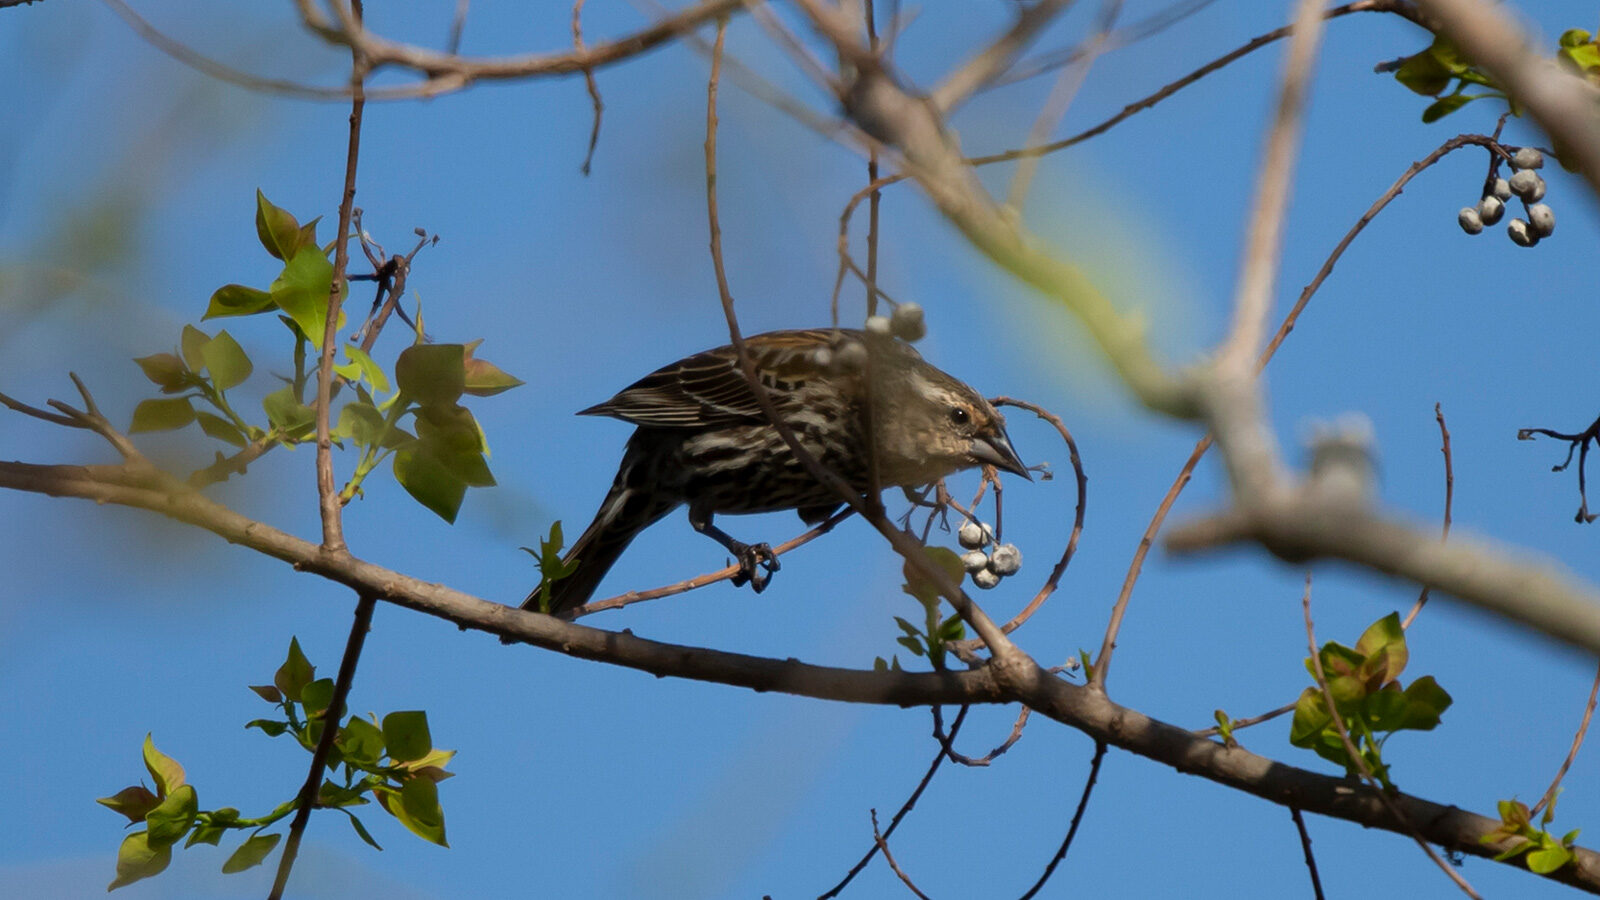 Female red-winged blackbird on a tree branch